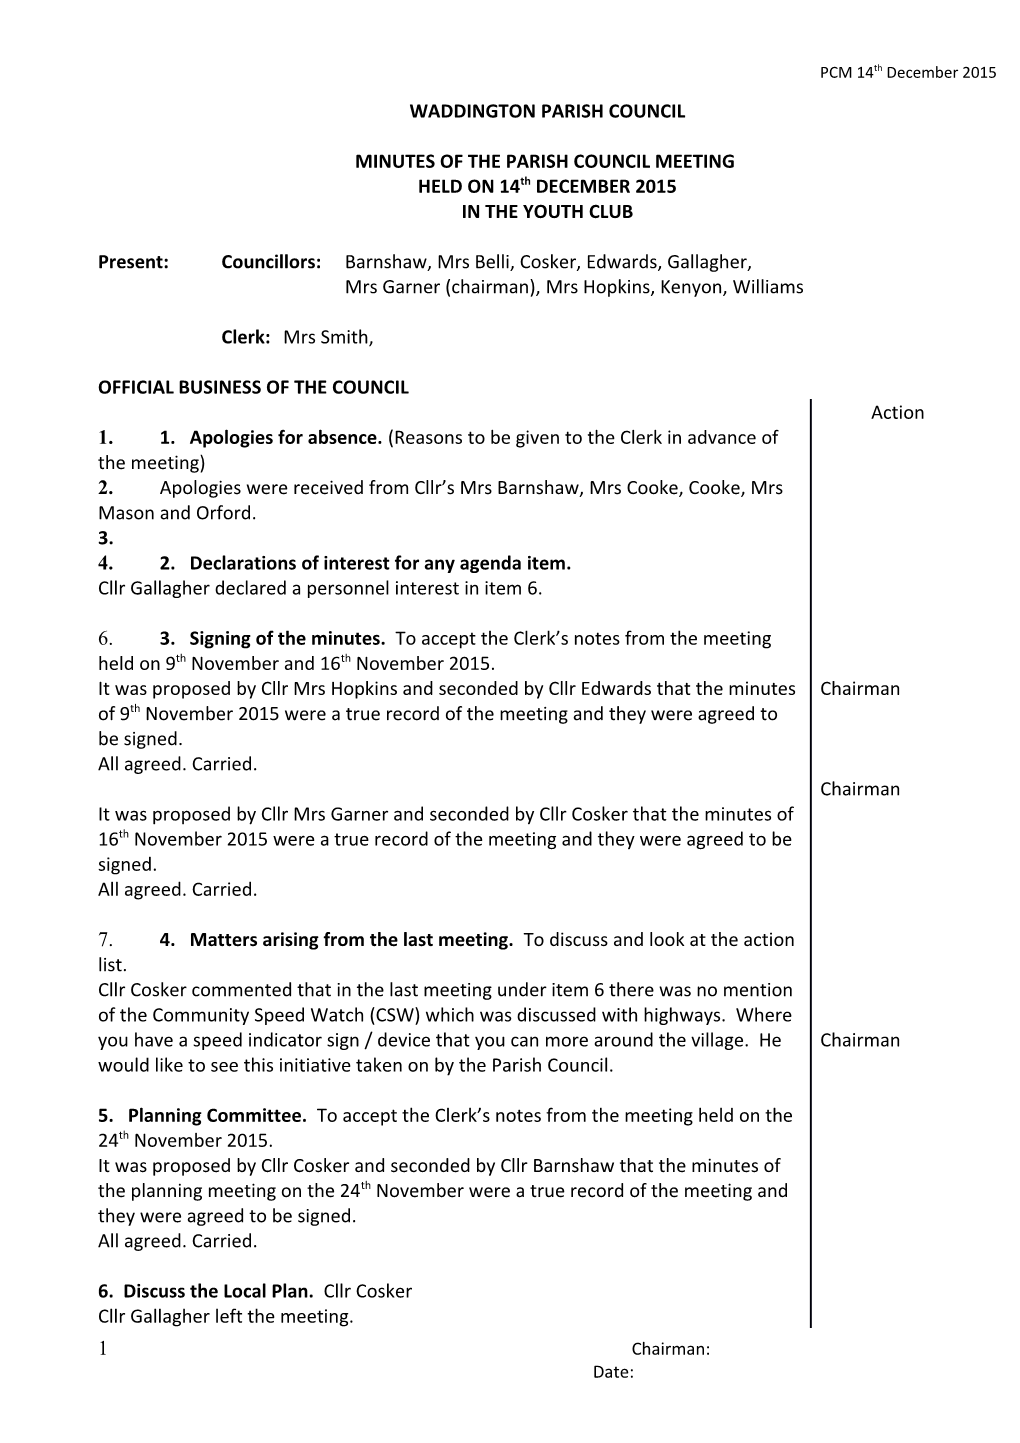 Minutes of the Parish Council Meeting s6